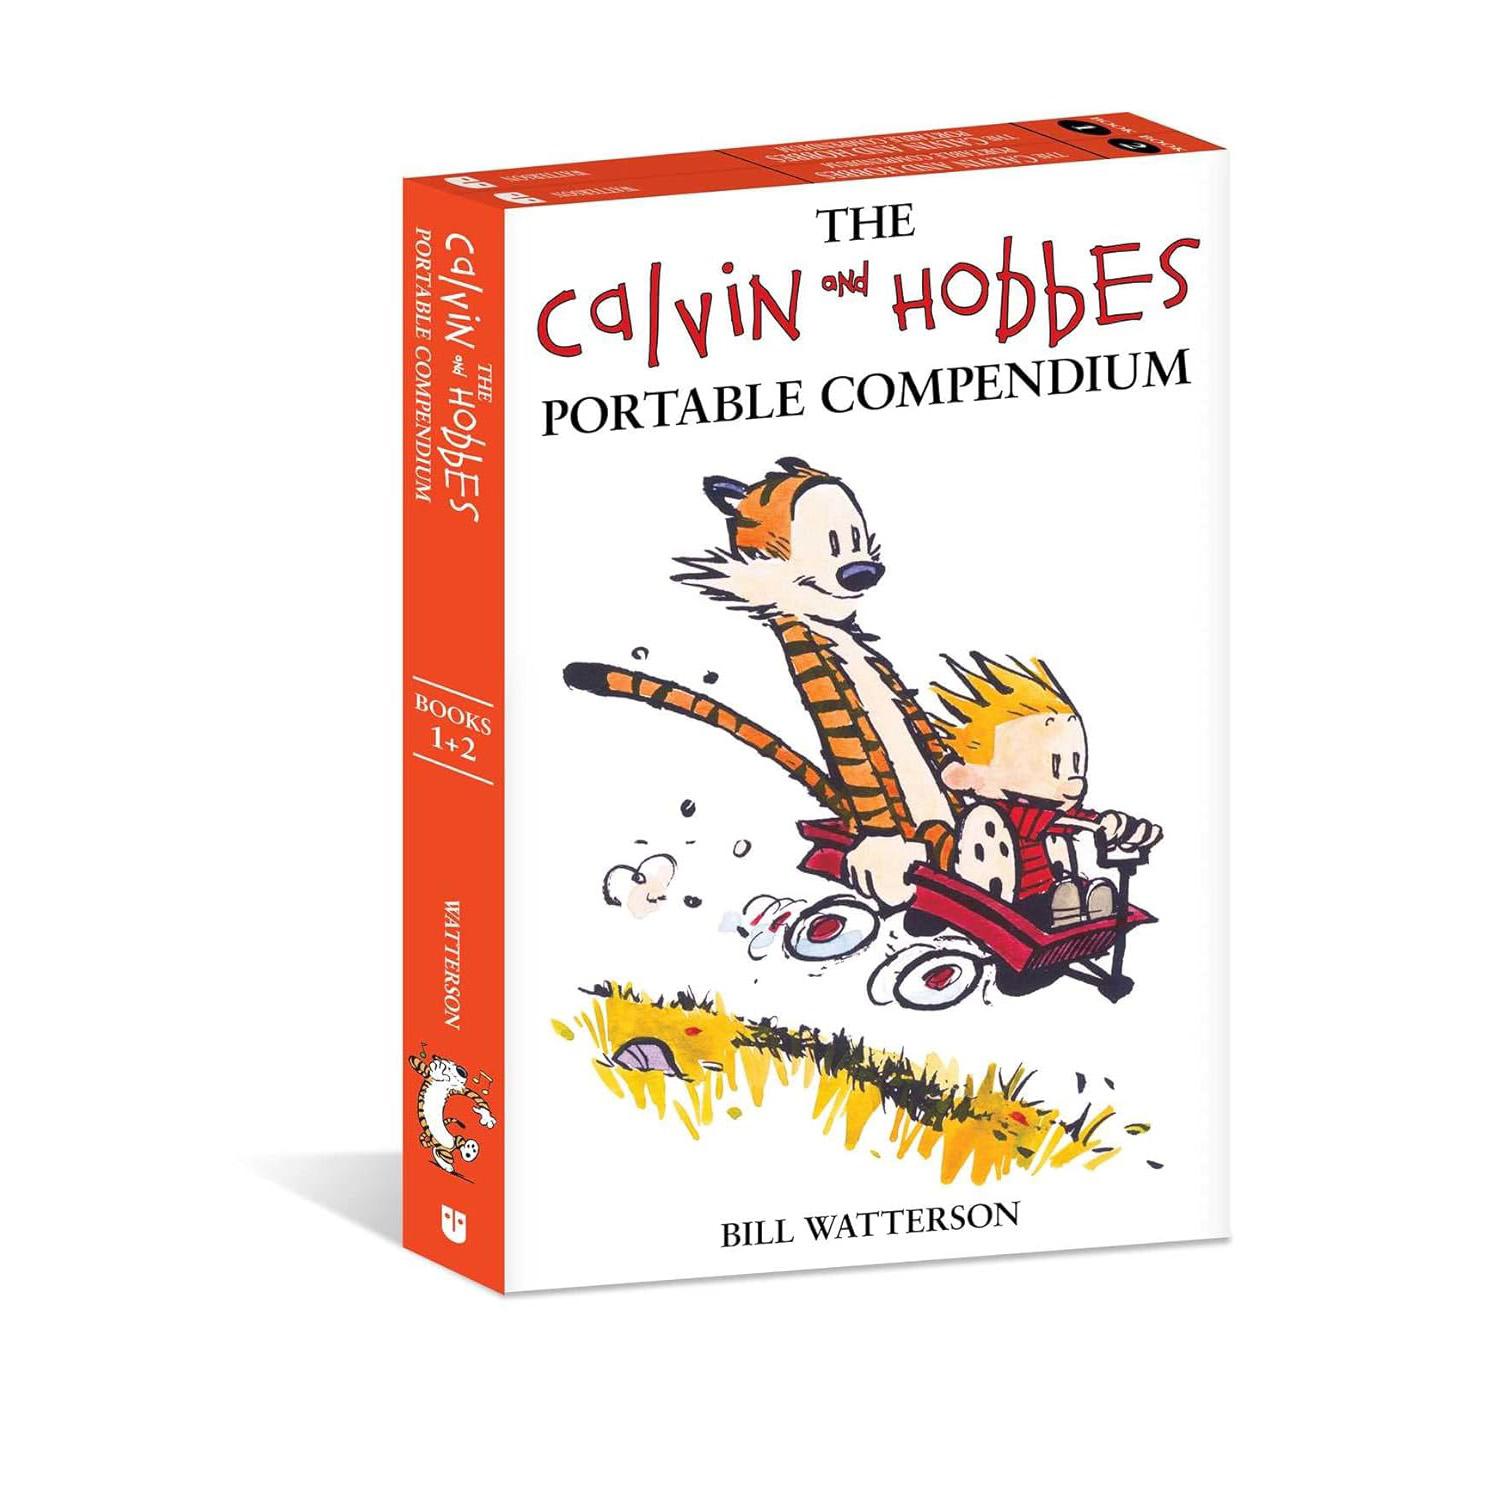 The Calvin and Hobbes Portable Compendium Set 1 by Bill Watterson for $10.99